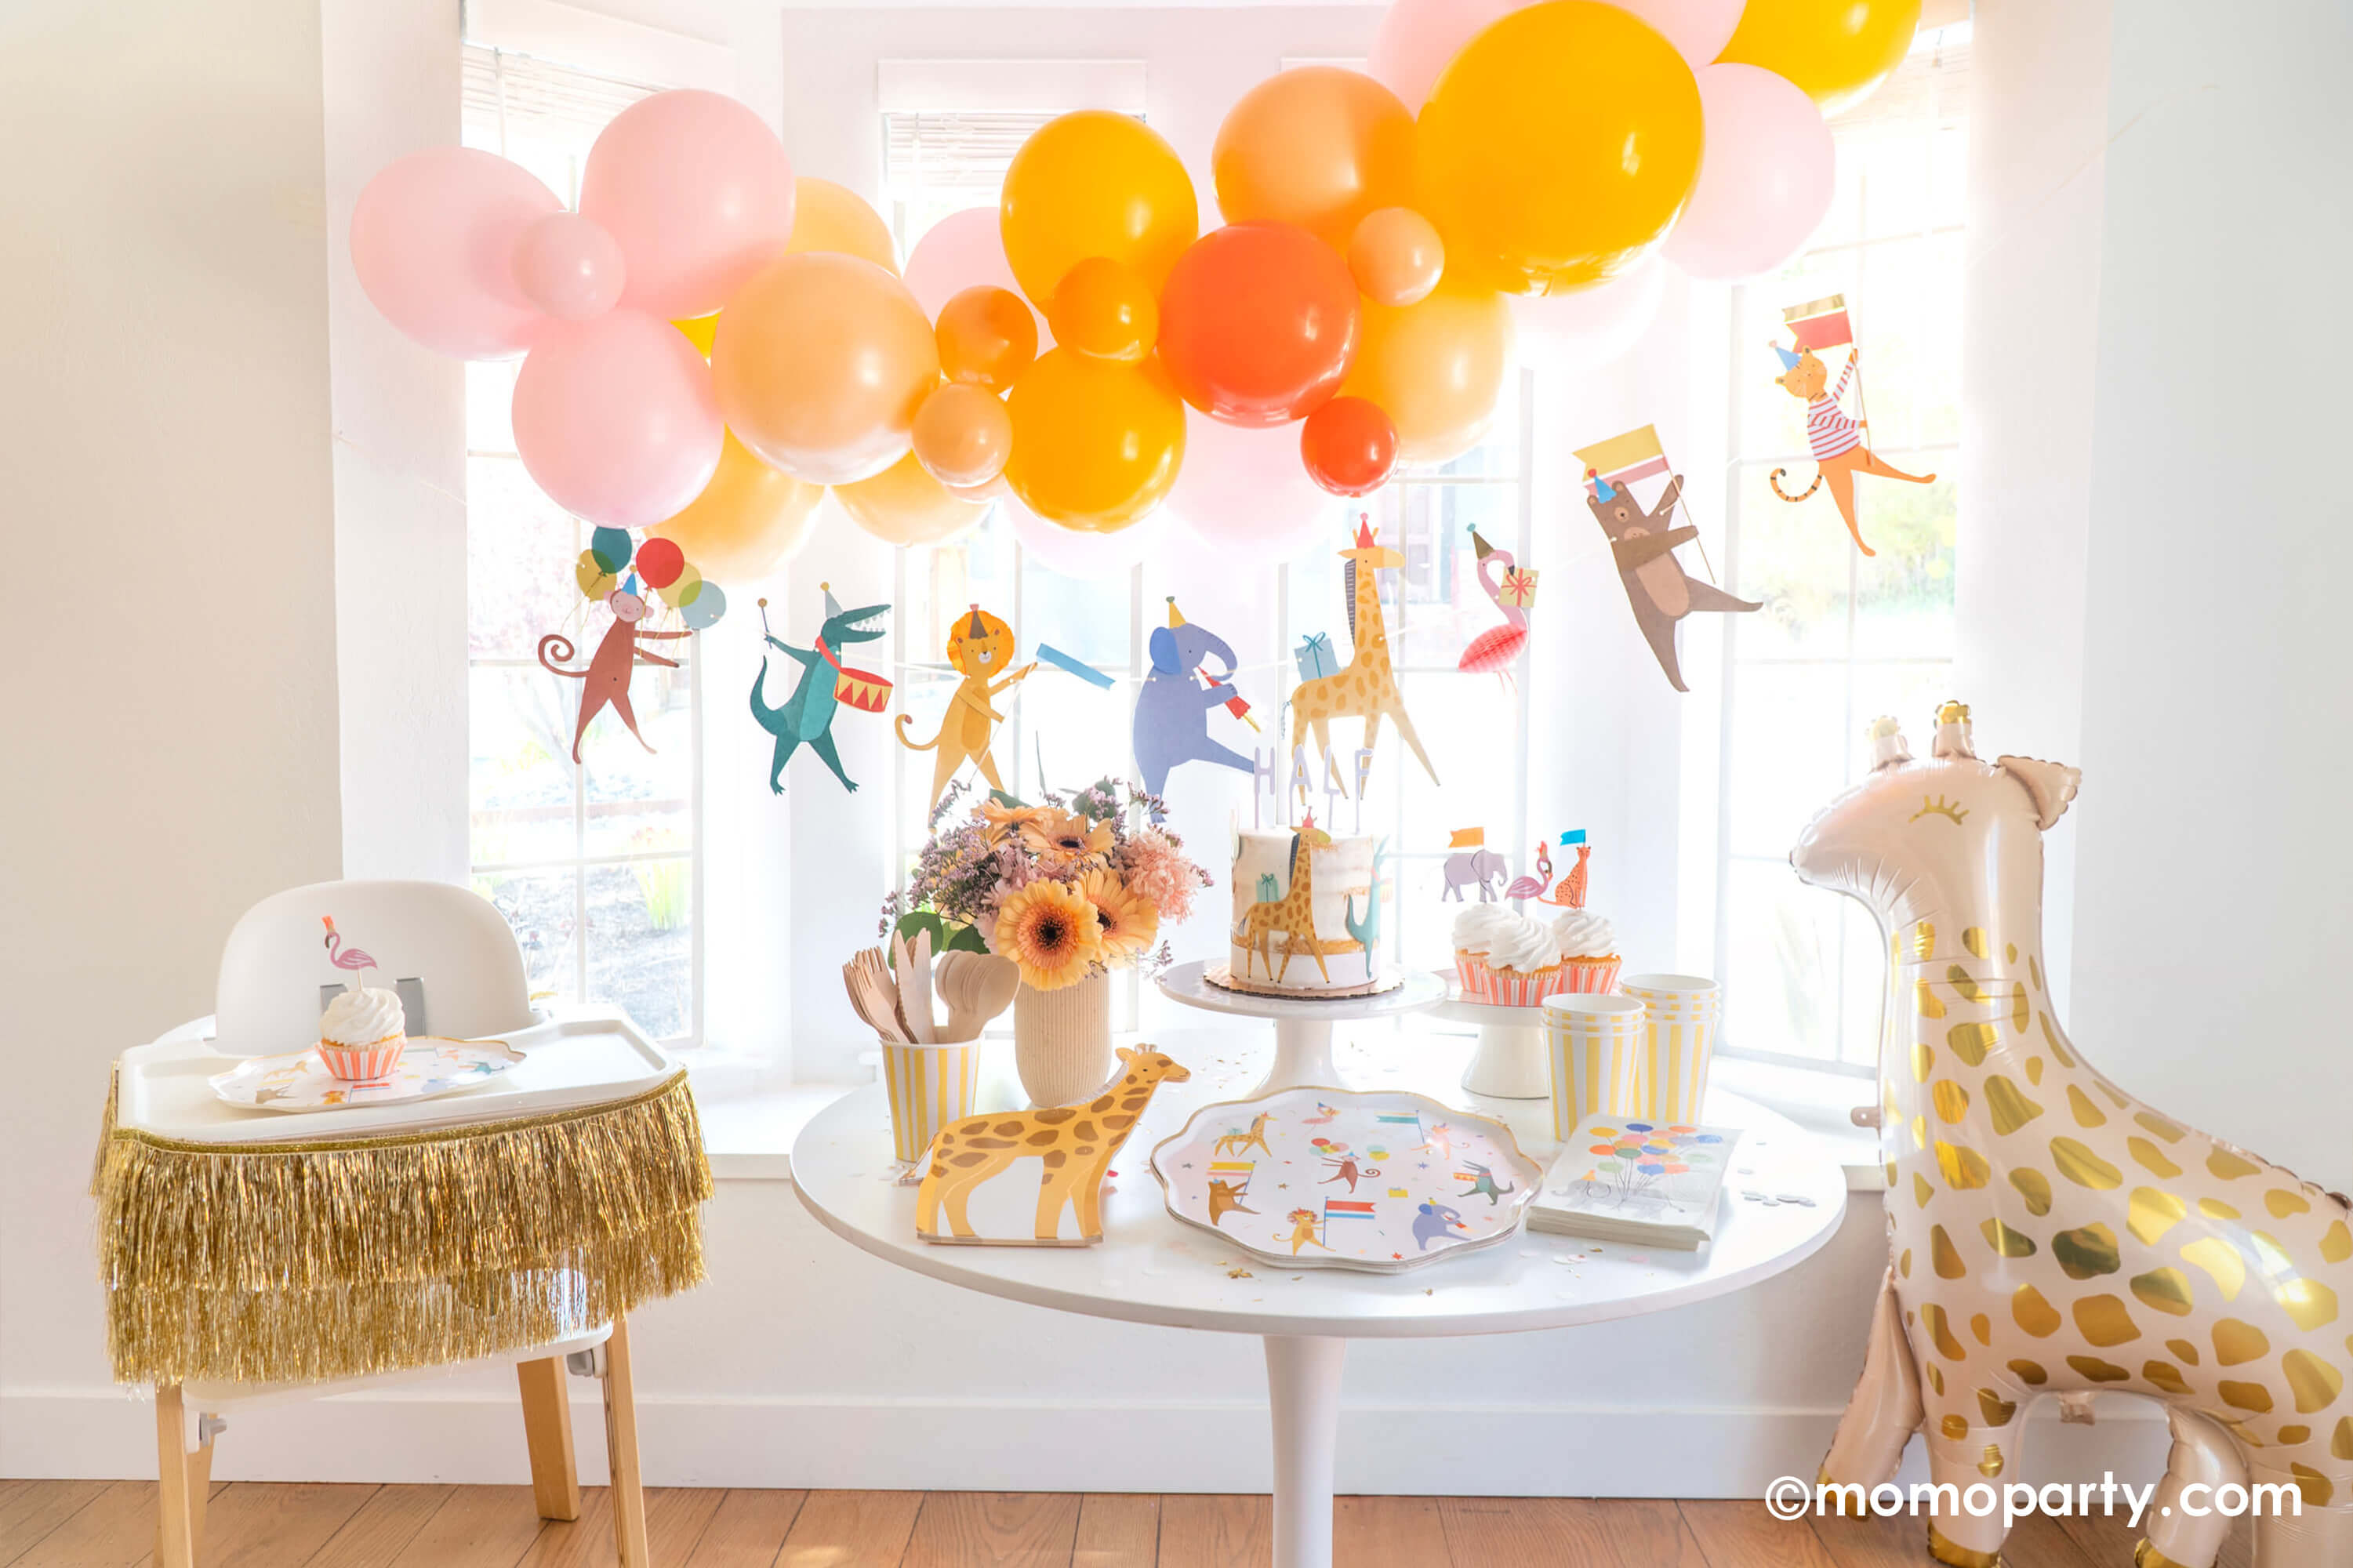 Adorable baby's animal themed party featuring Momo Party's animal parade birthday garland featuring a lion, an elephant, an alligator, a giraffe, along with a festive balloon garland in a warm color tone hanging above. On the dessert table, there are Meri Meri's animal parade dinner plates, giraffe shaped plates and cupcakes dressed with the safari animal toppers, next to the table there's a giraffe shaped foil balloon. One the left a highchair is decorated with a gold tinsel garland.